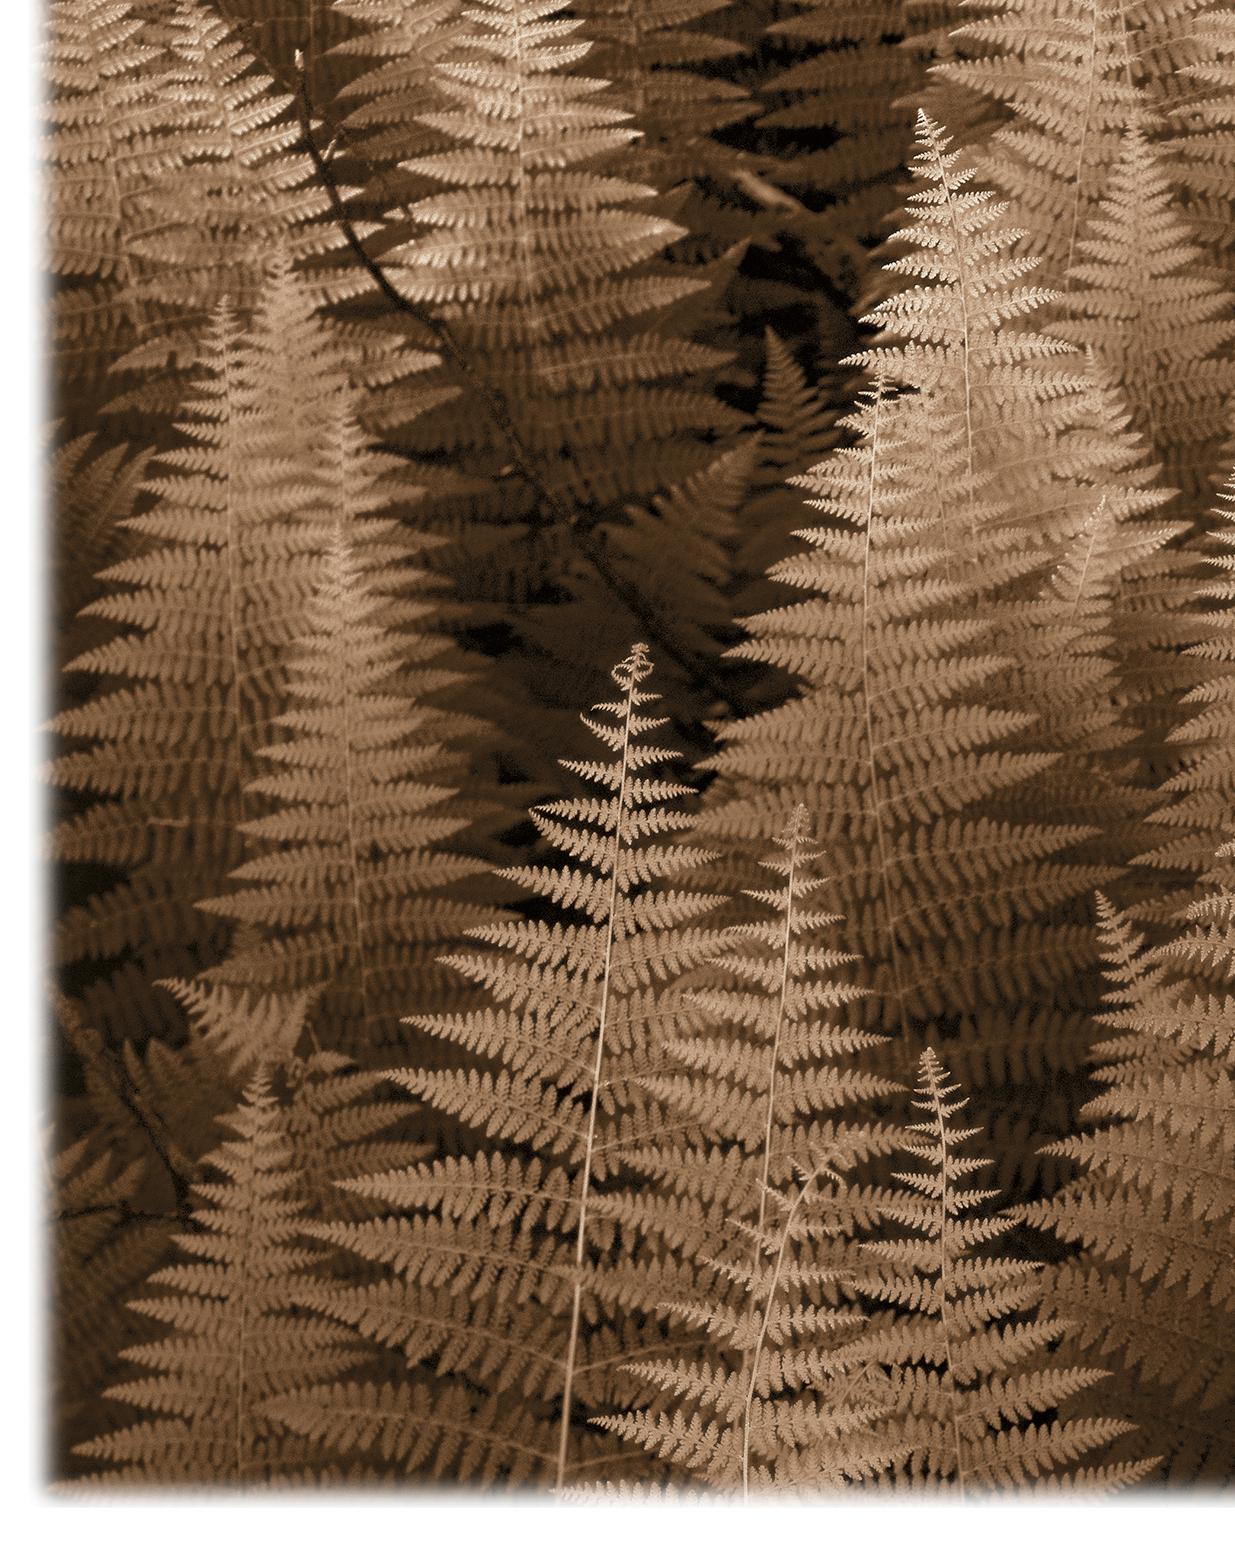 Ferns No. 2 (Sepia-Tone Botanical Still-Life Photograph on Watercolor Paper) For Sale 3